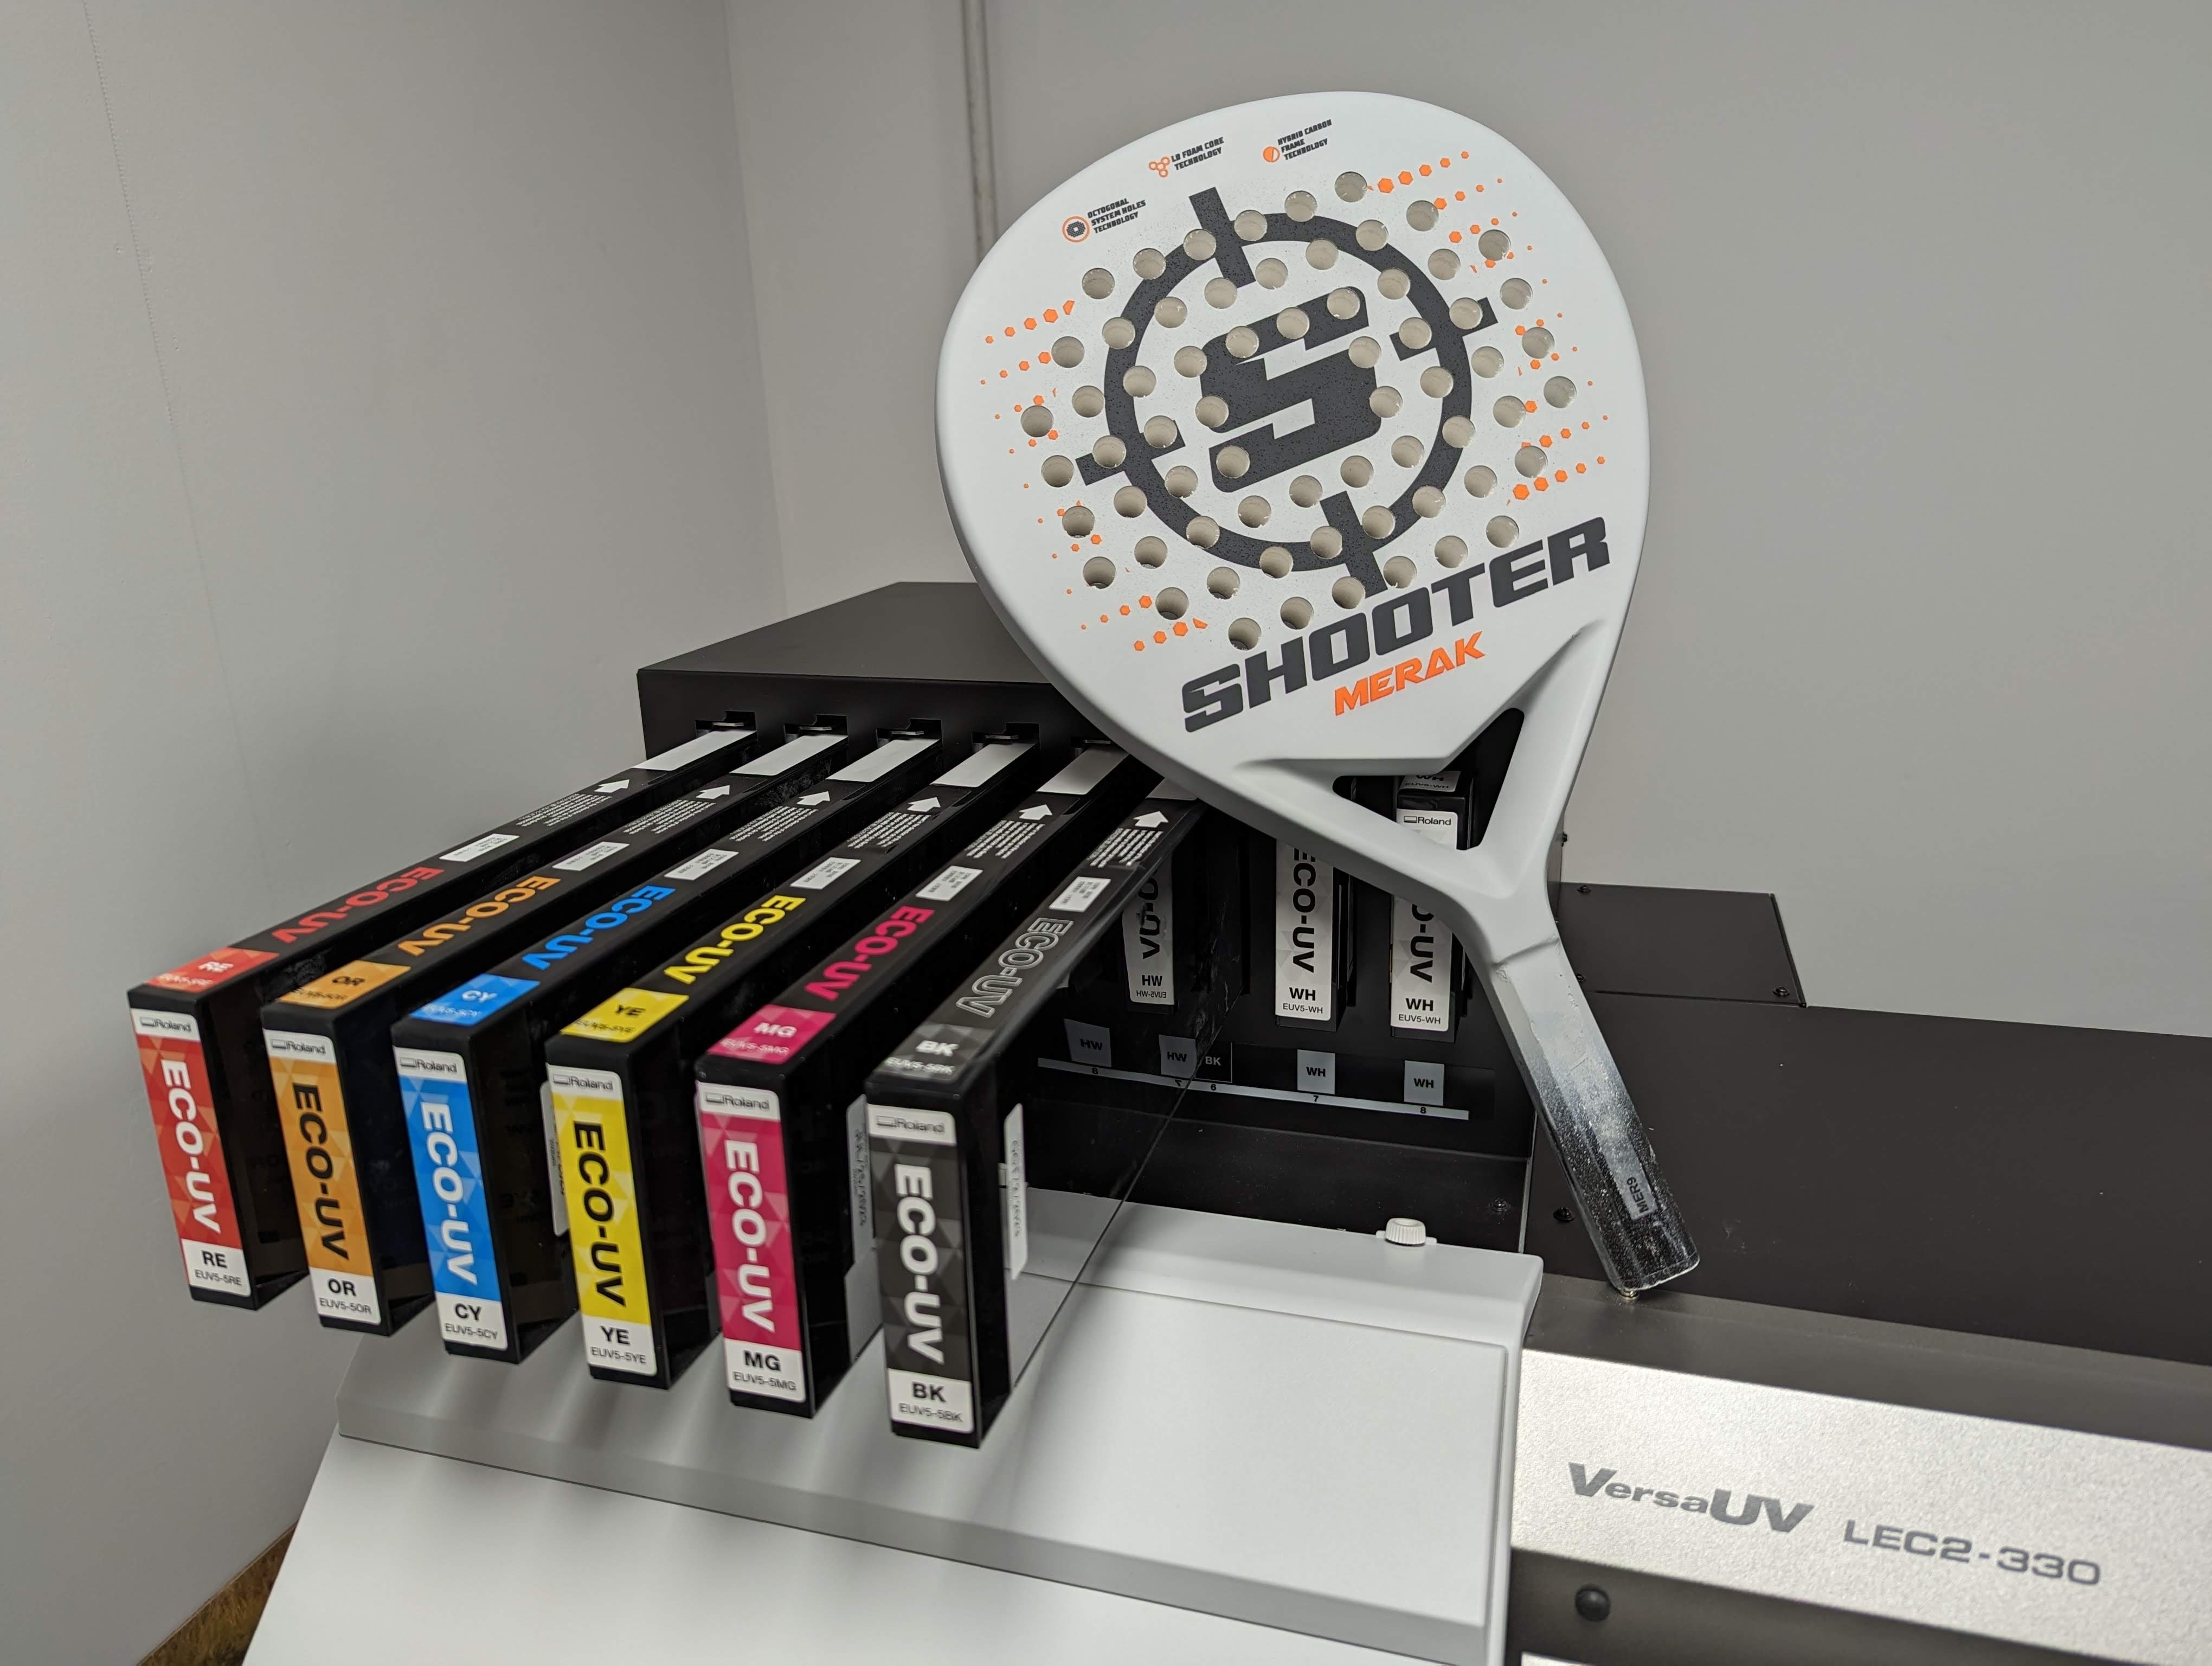 Produce high-quality rackets that express vivid colors with orange and red ink